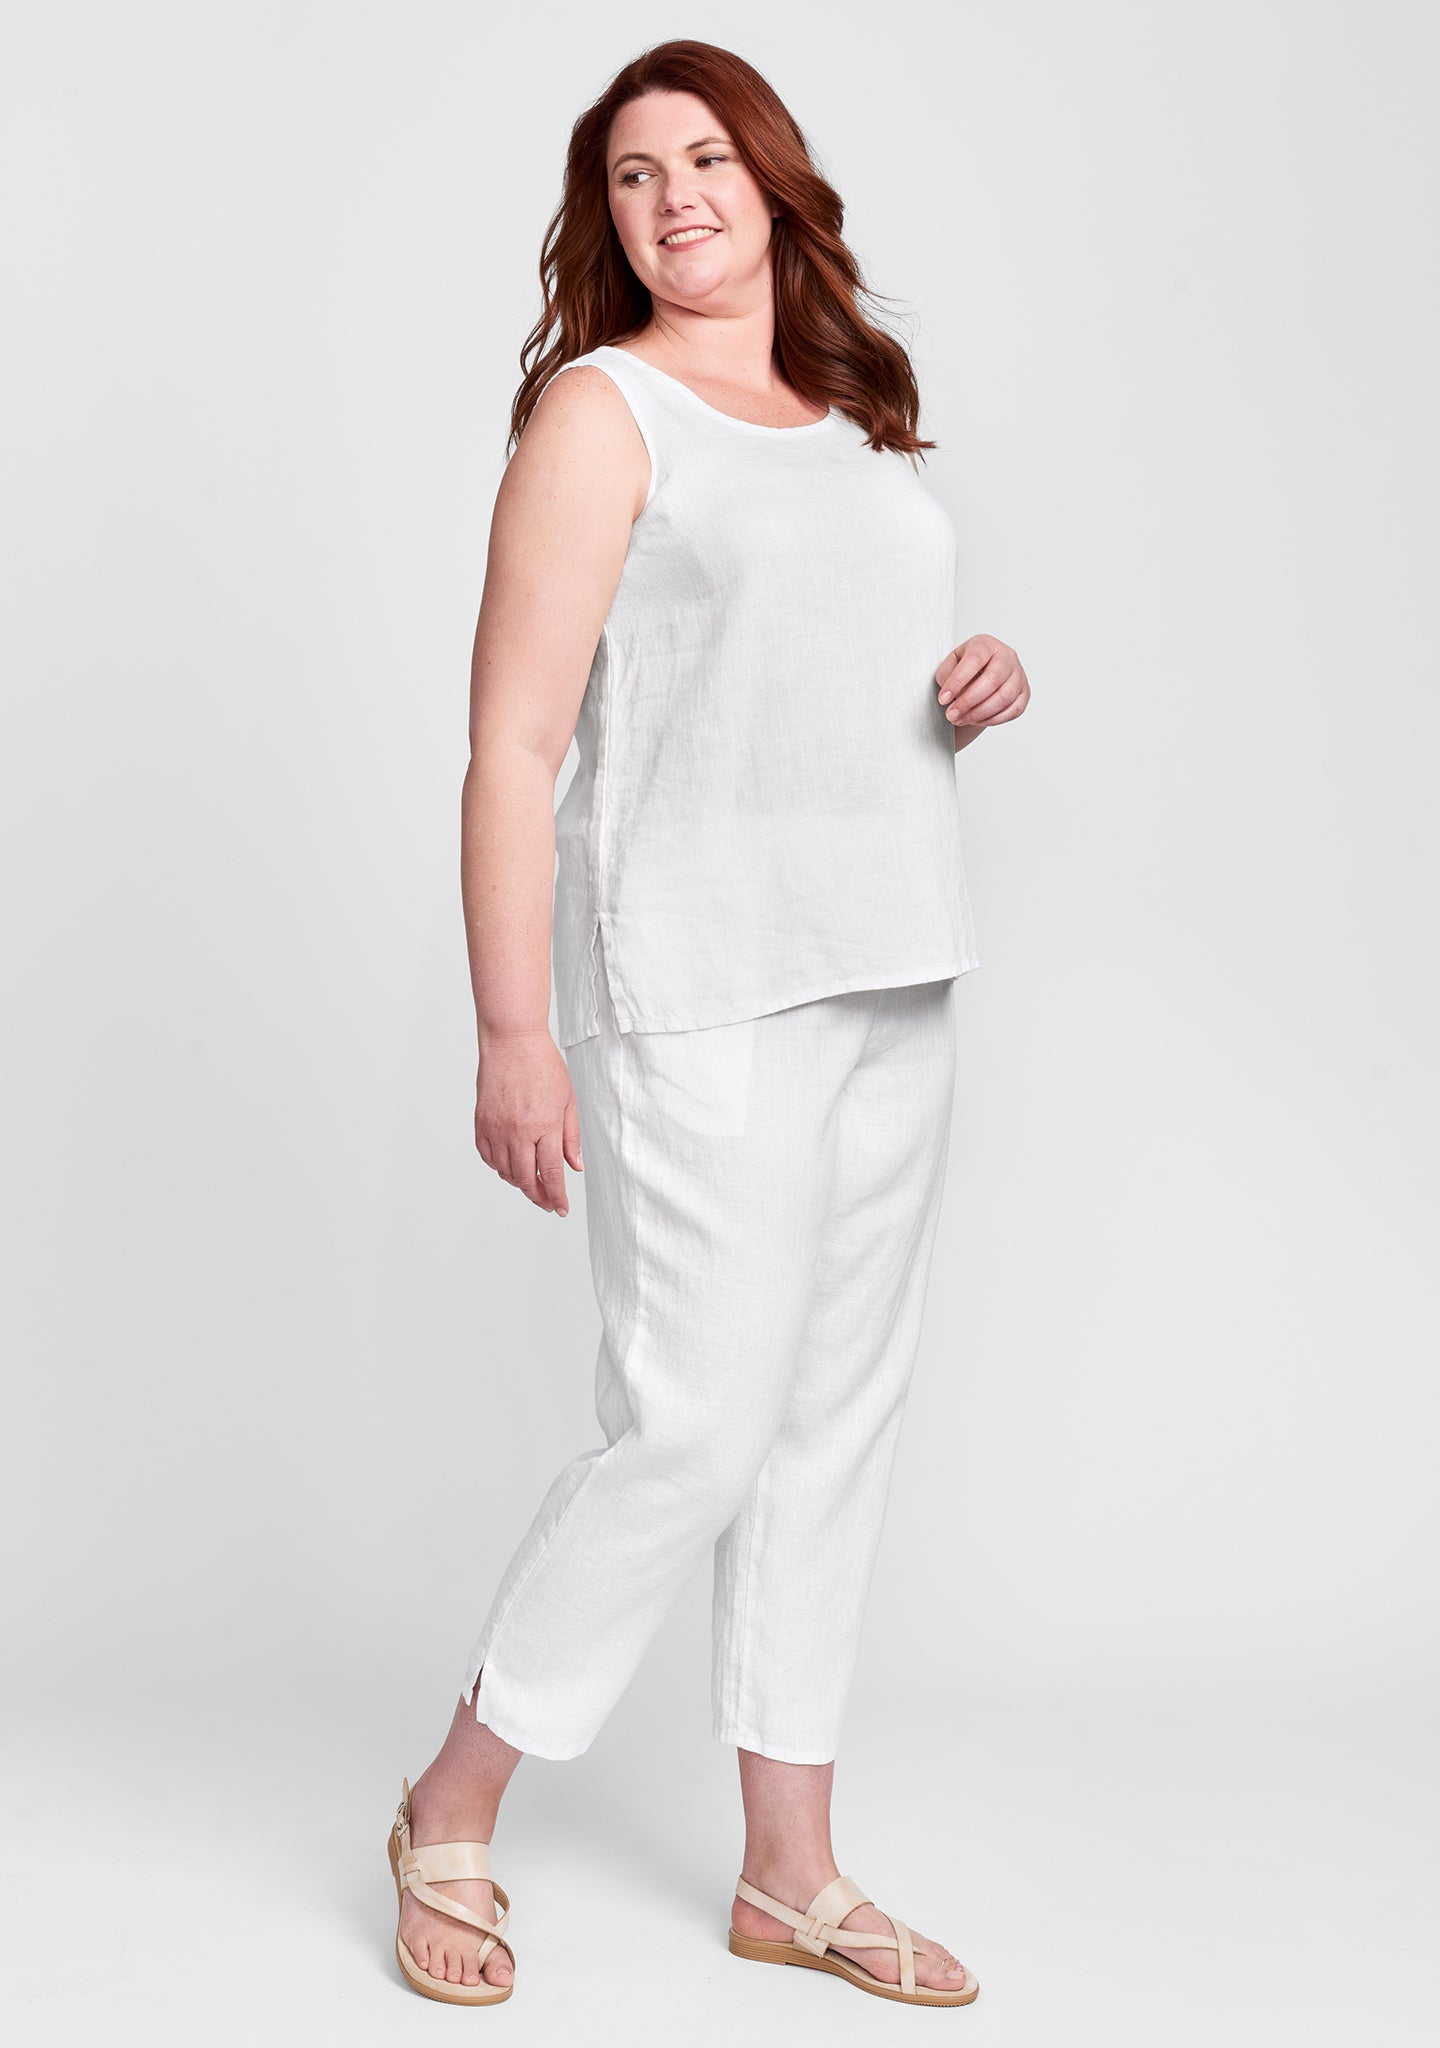 FLAX linen tank in white with linen pants in white